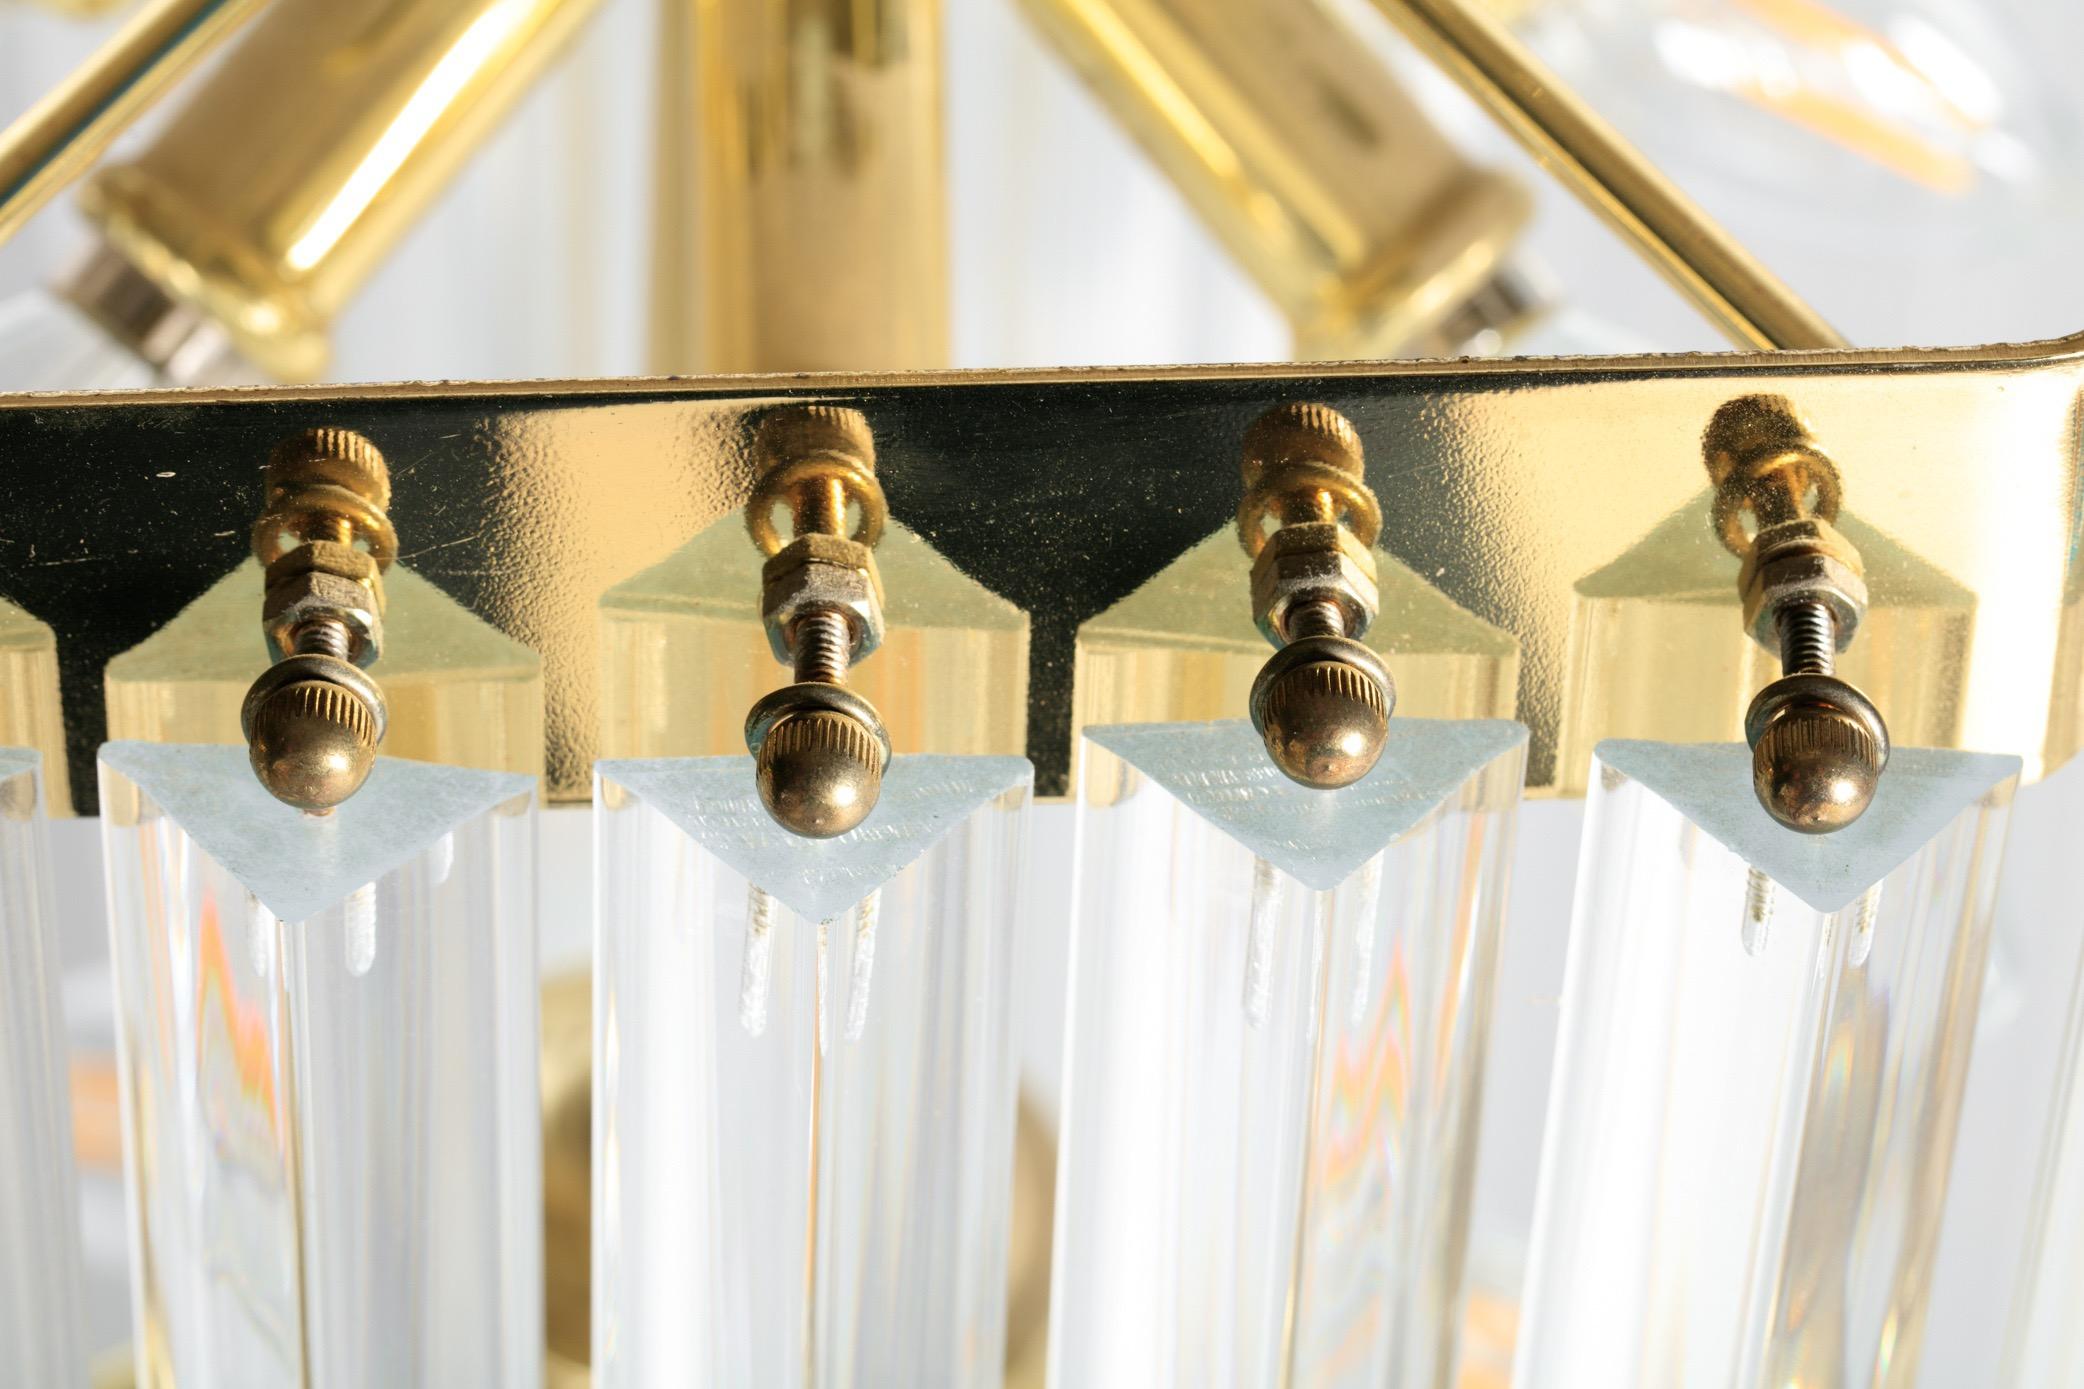 Extra Large Sculptural Lucite and Brass Chandelier, circa 1970s For Sale 3